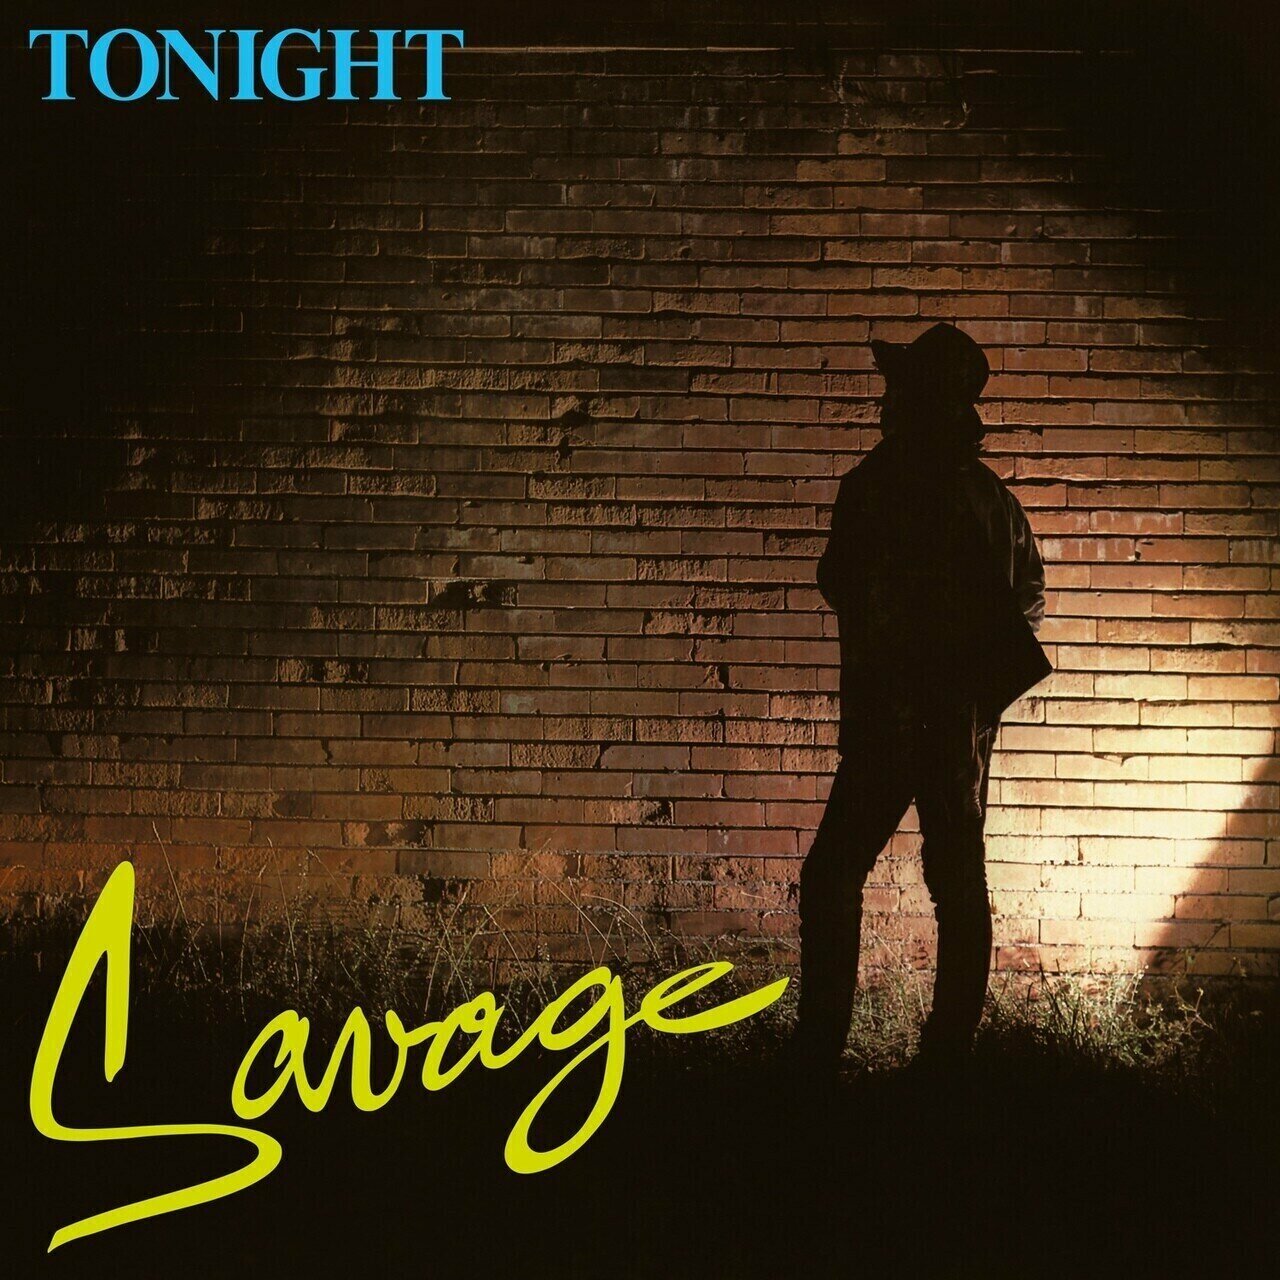 CD Savage - "Tonight" (1983/2022) Limited Expanded Edition